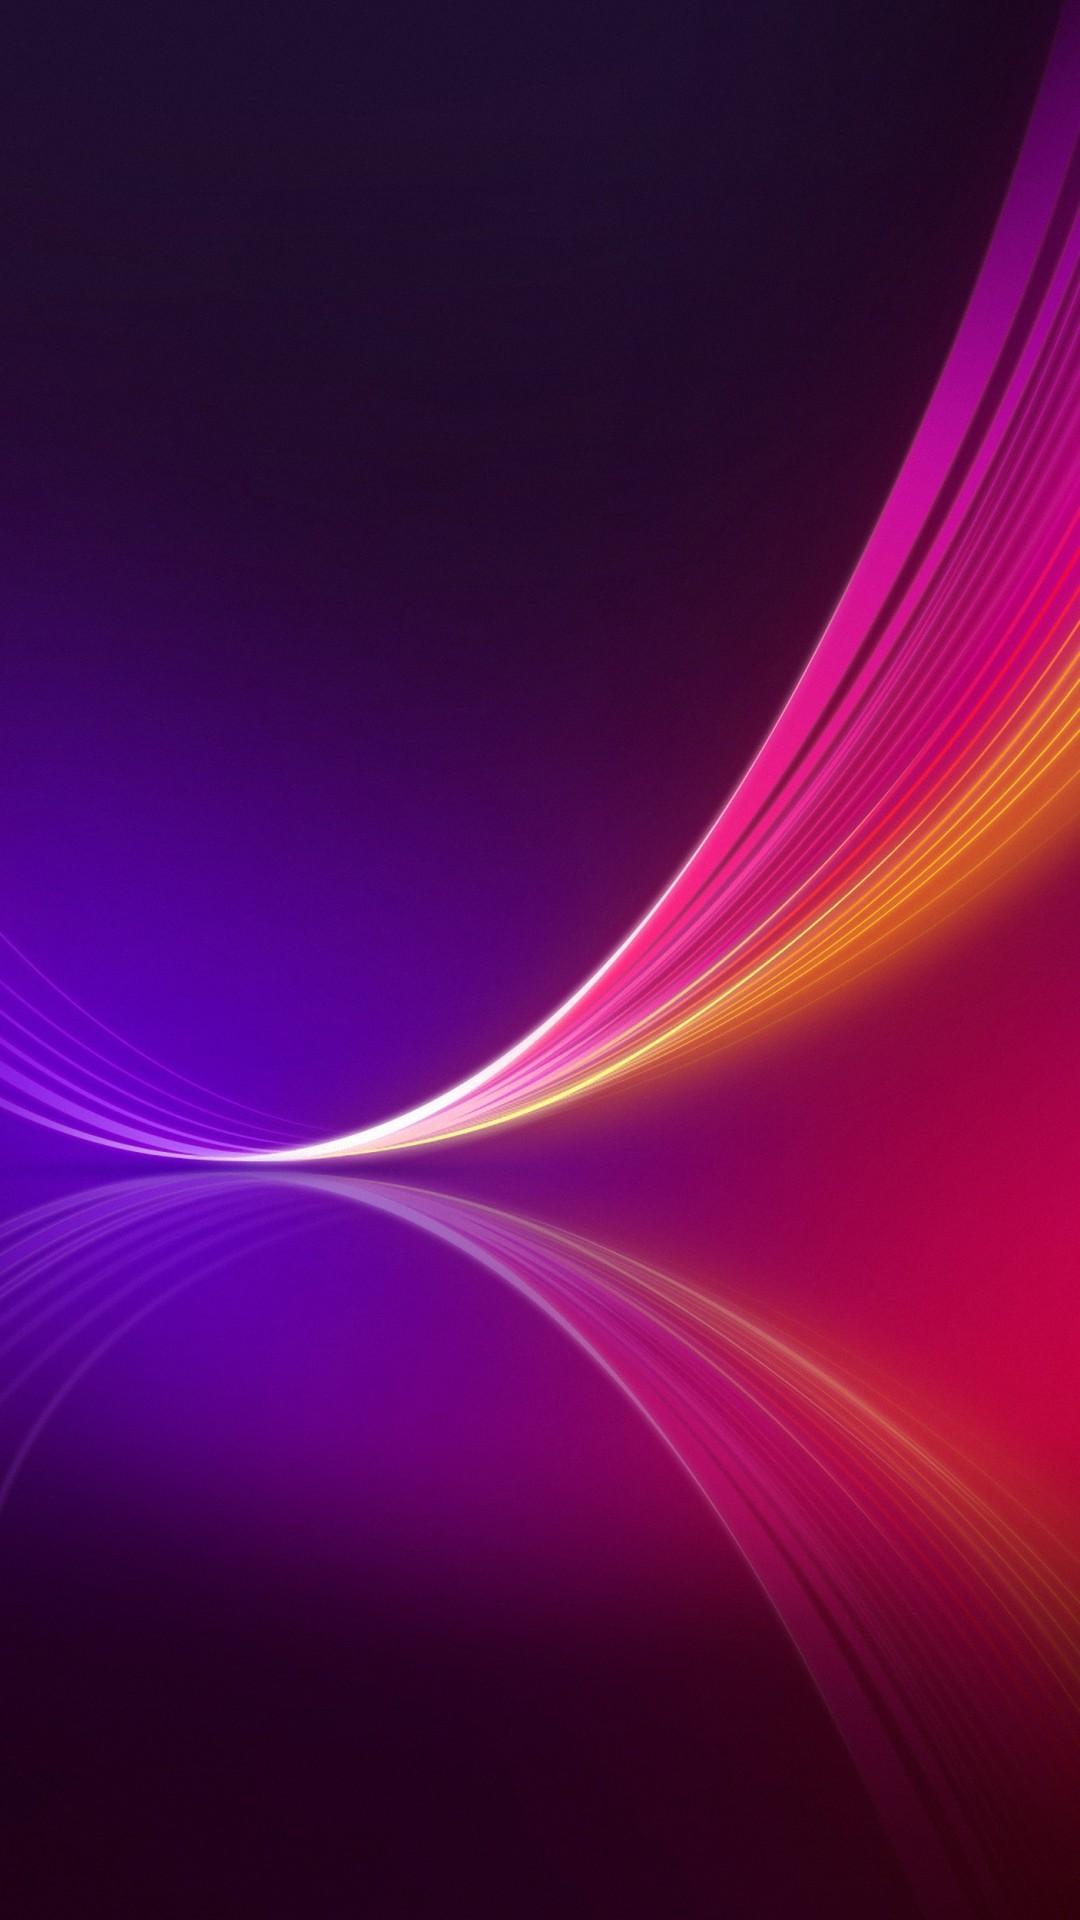 1080 x 1920 · jpeg - HD Phone Wallpapers 1080p (74+ images)